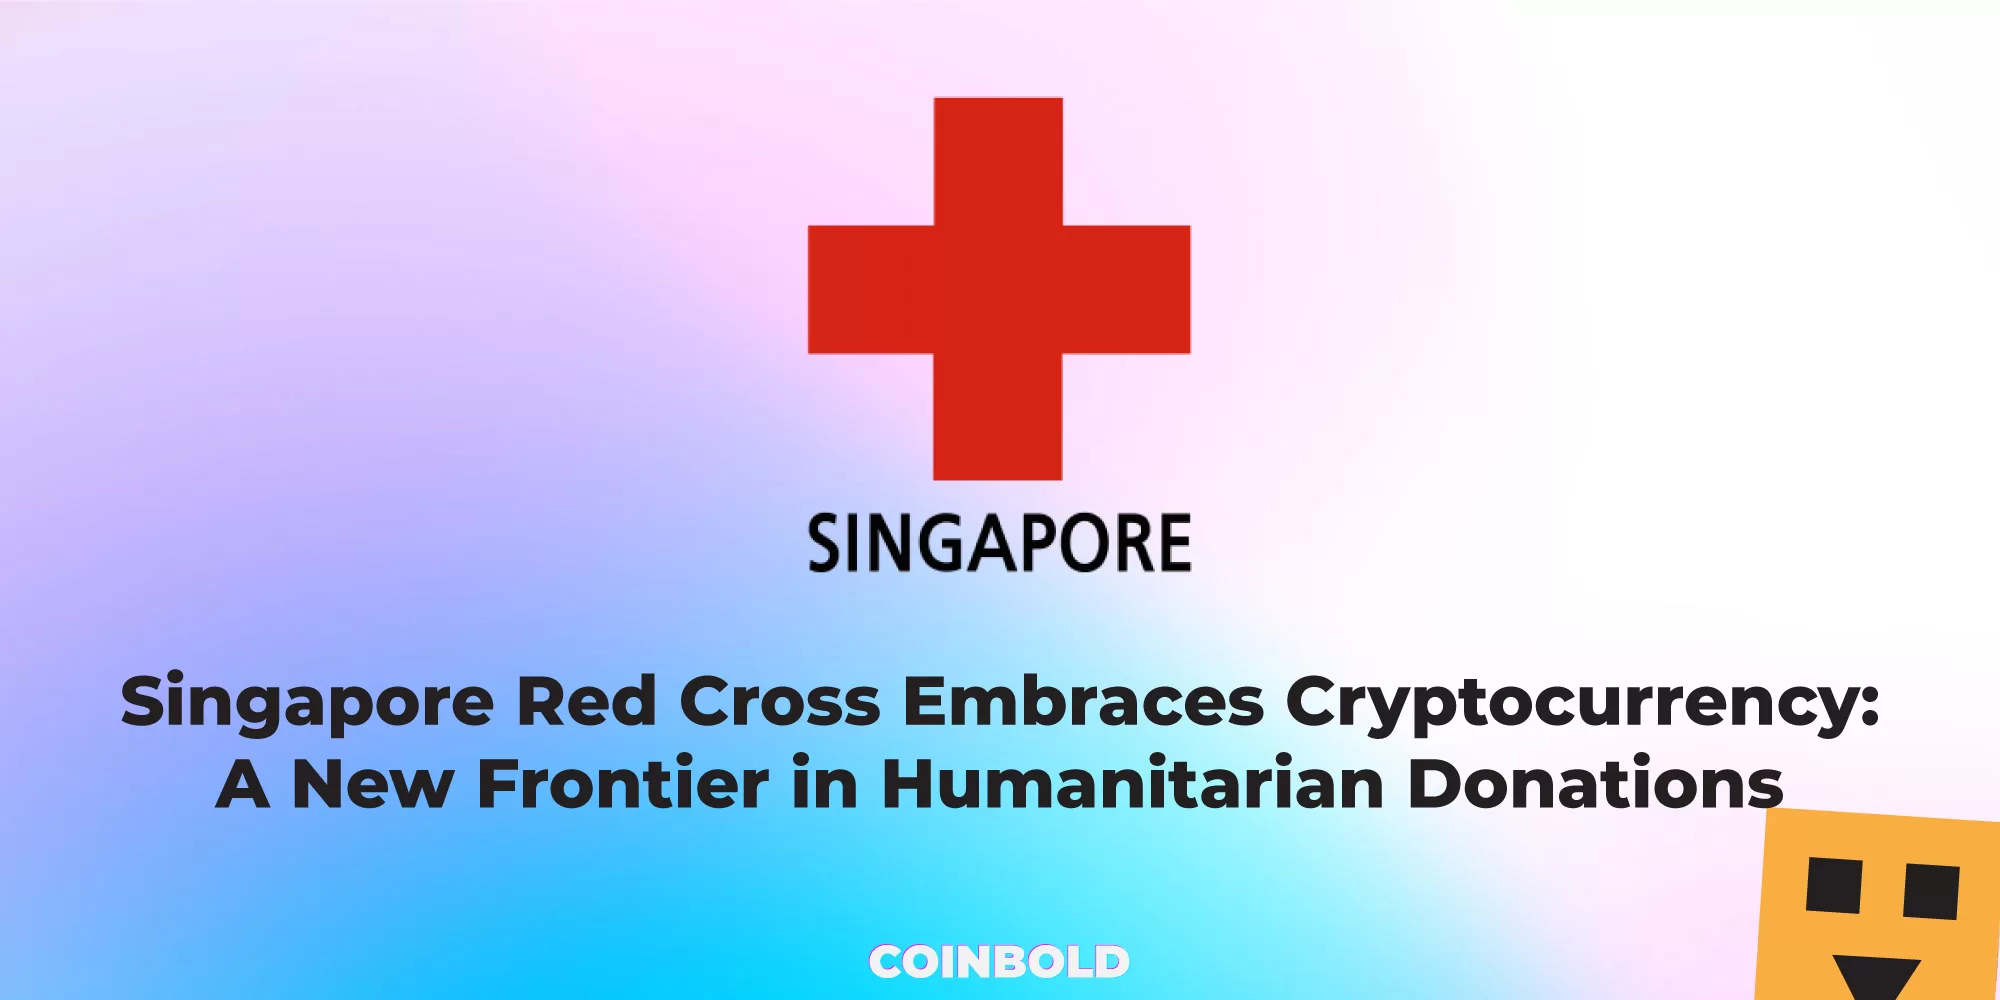 Singapore Red Cross Embraces Cryptocurrency A New Frontier in Humanitarian Donations